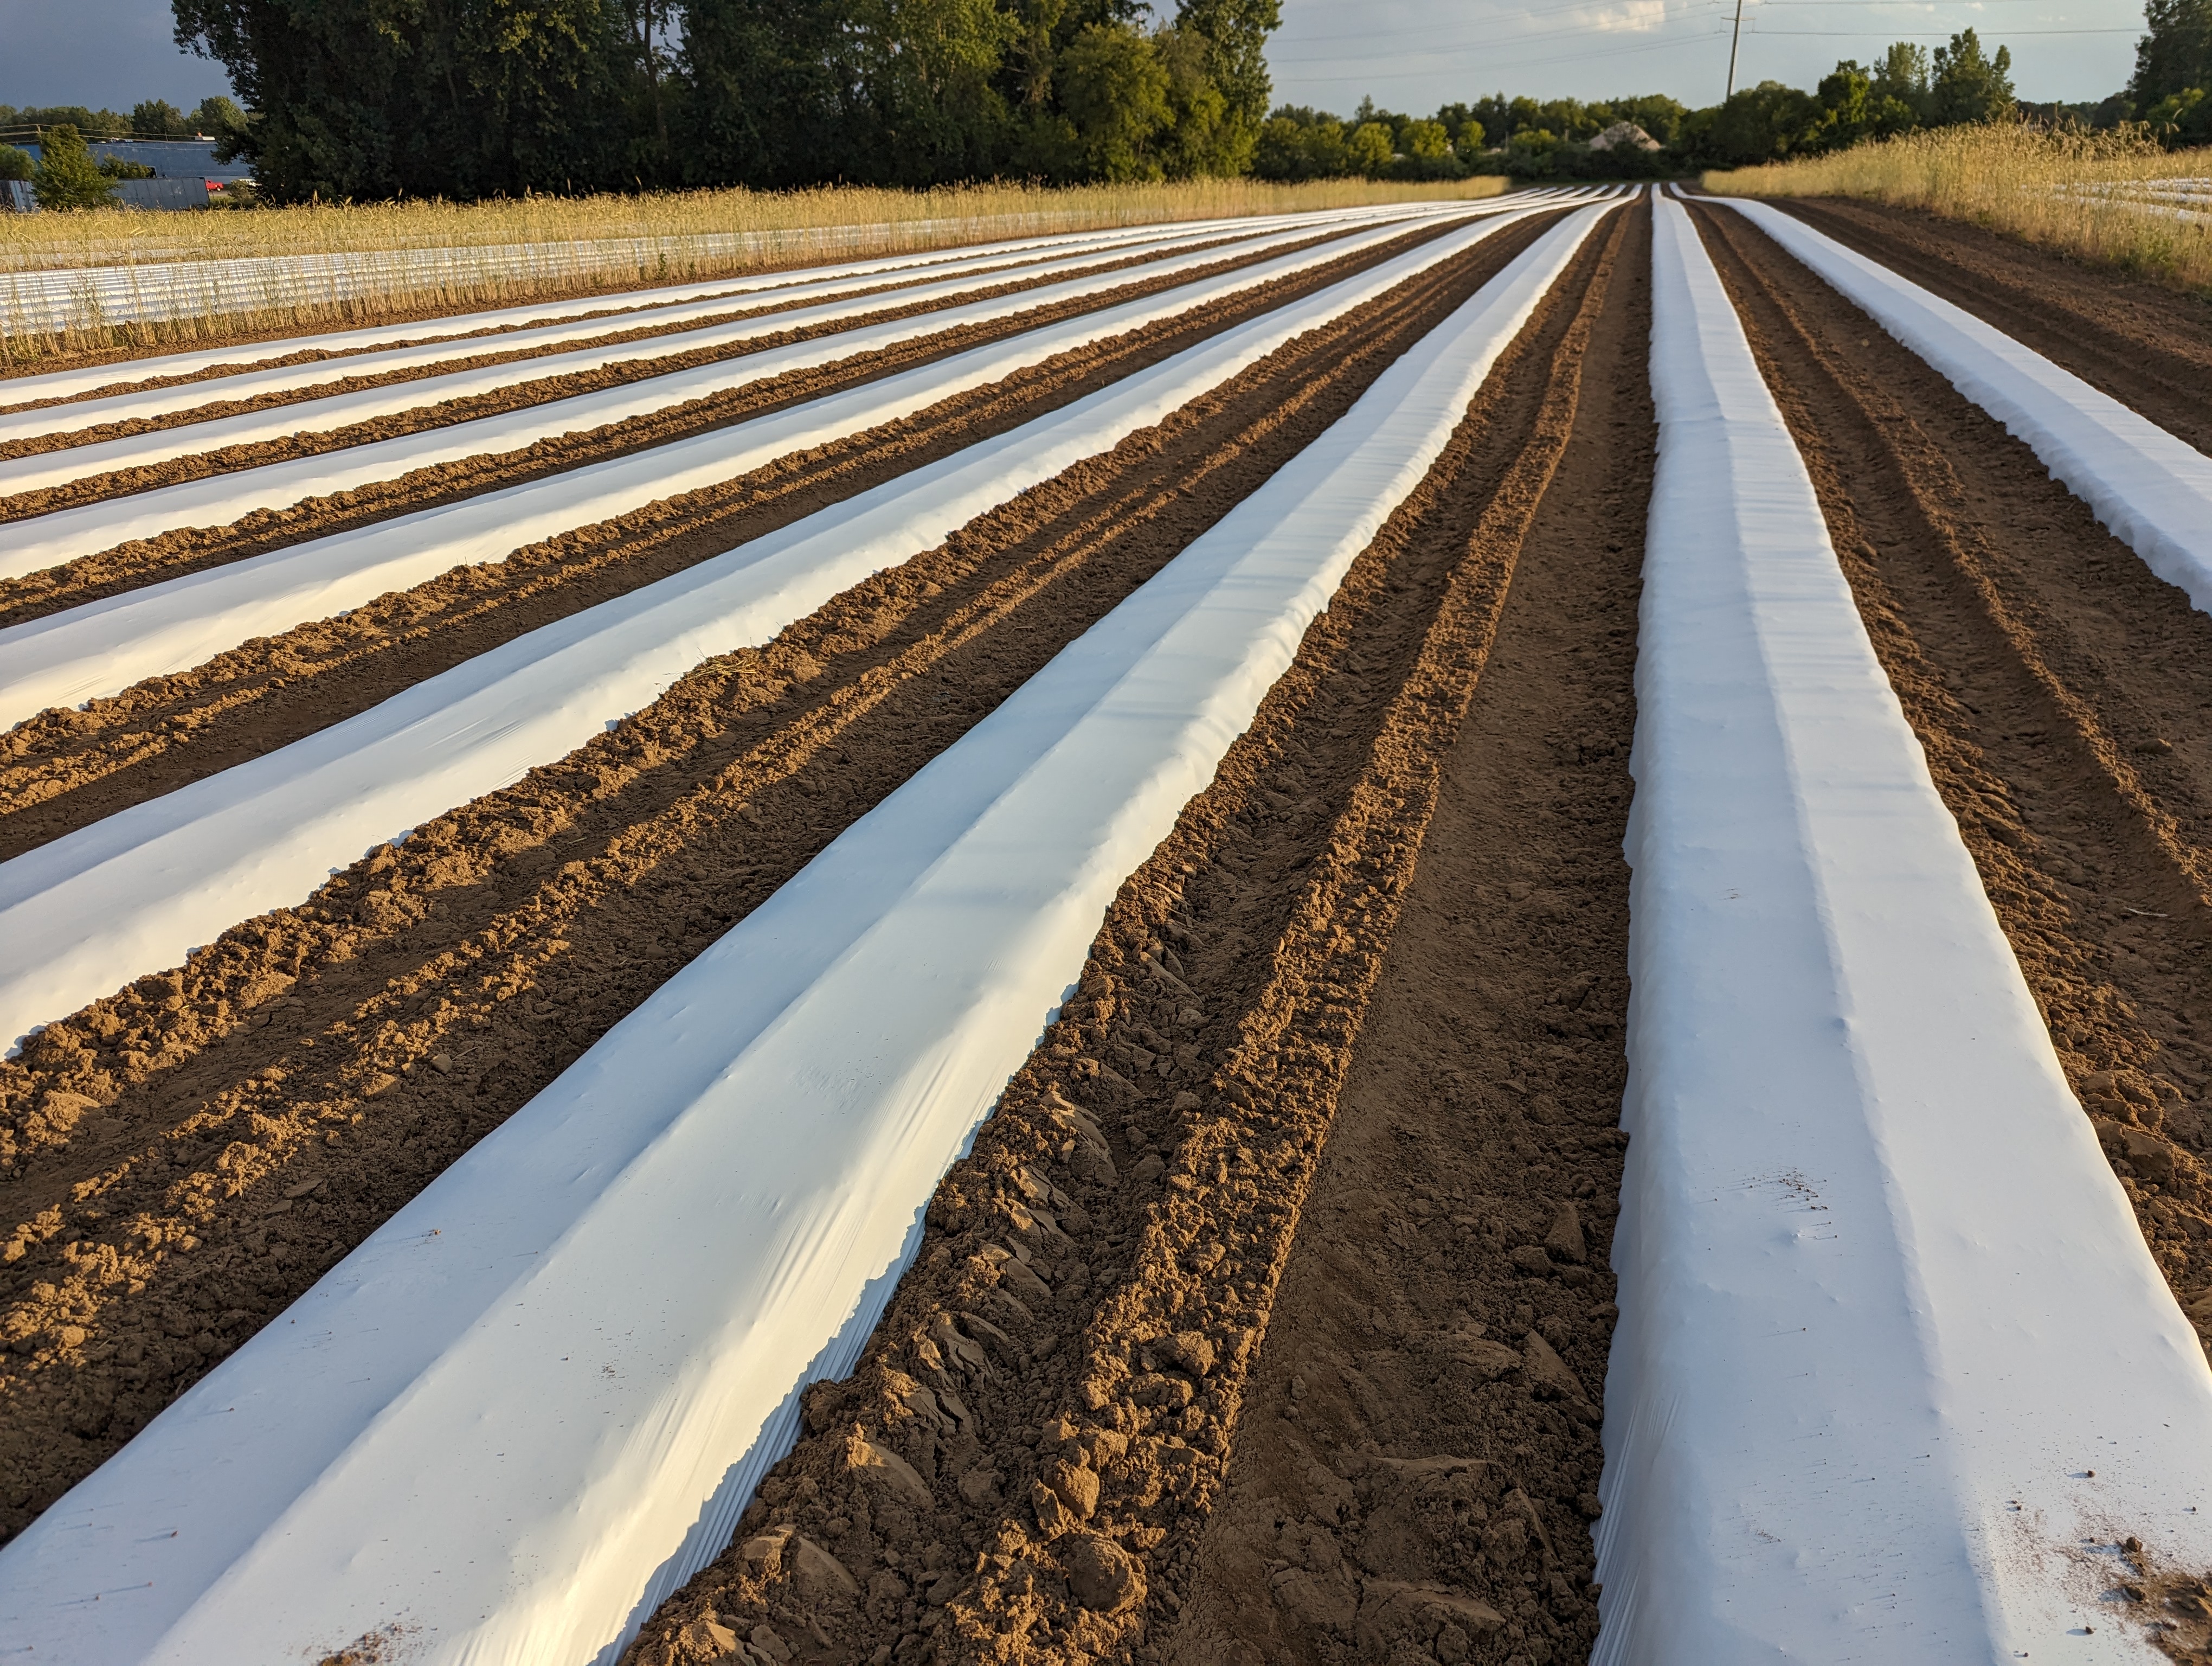 White plastic covering plantings in a field.